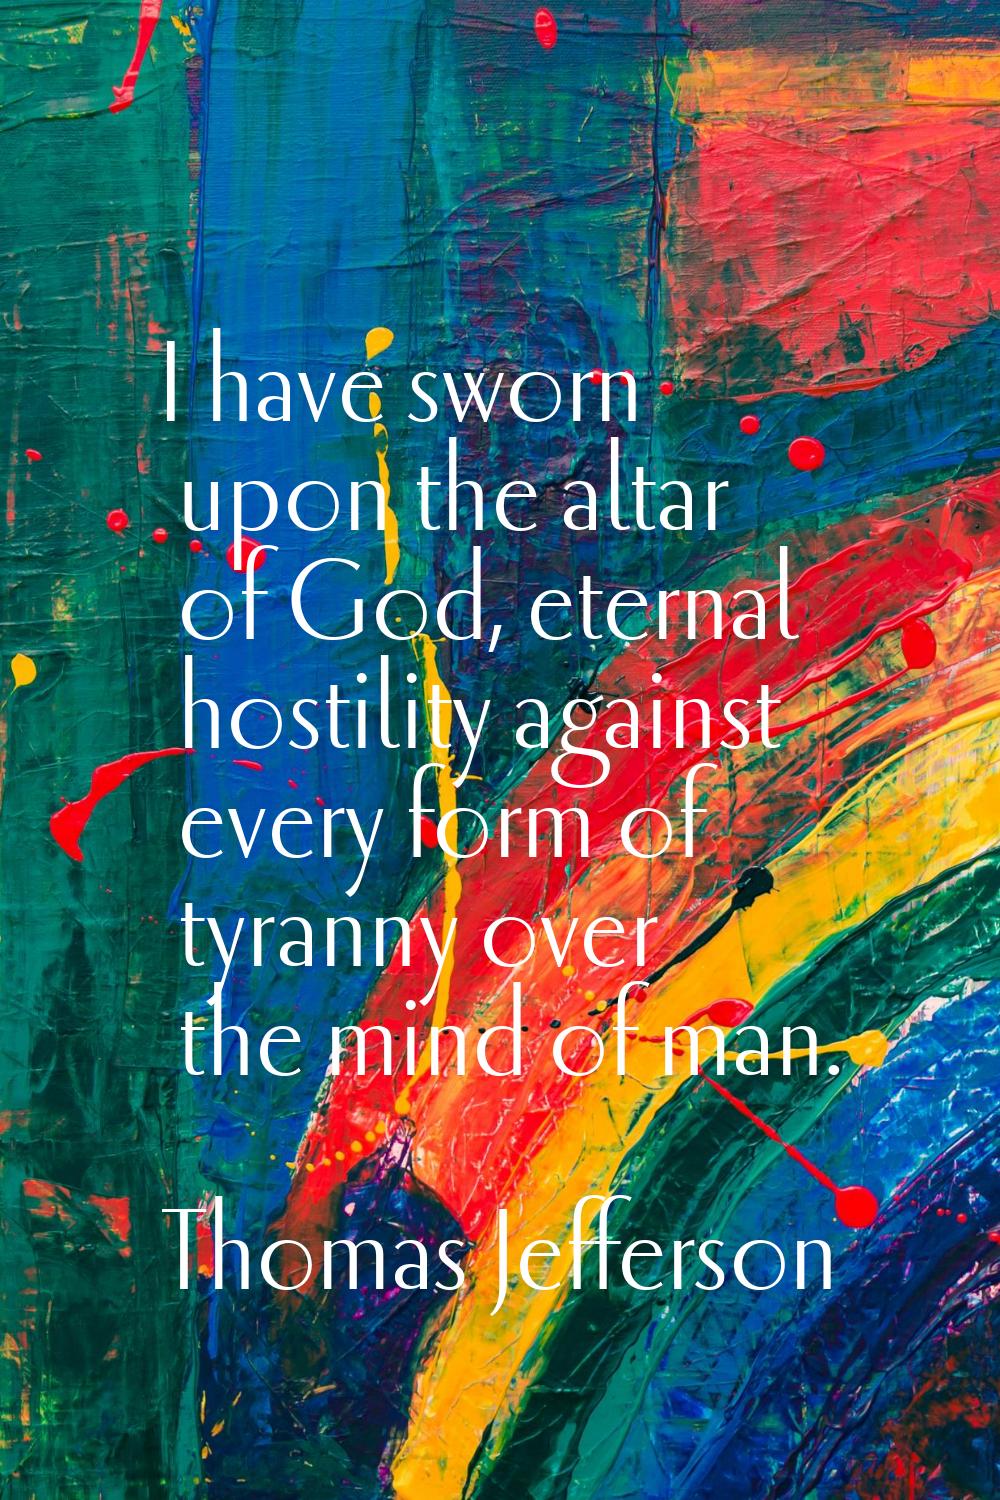 I have sworn upon the altar of God, eternal hostility against every form of tyranny over the mind o